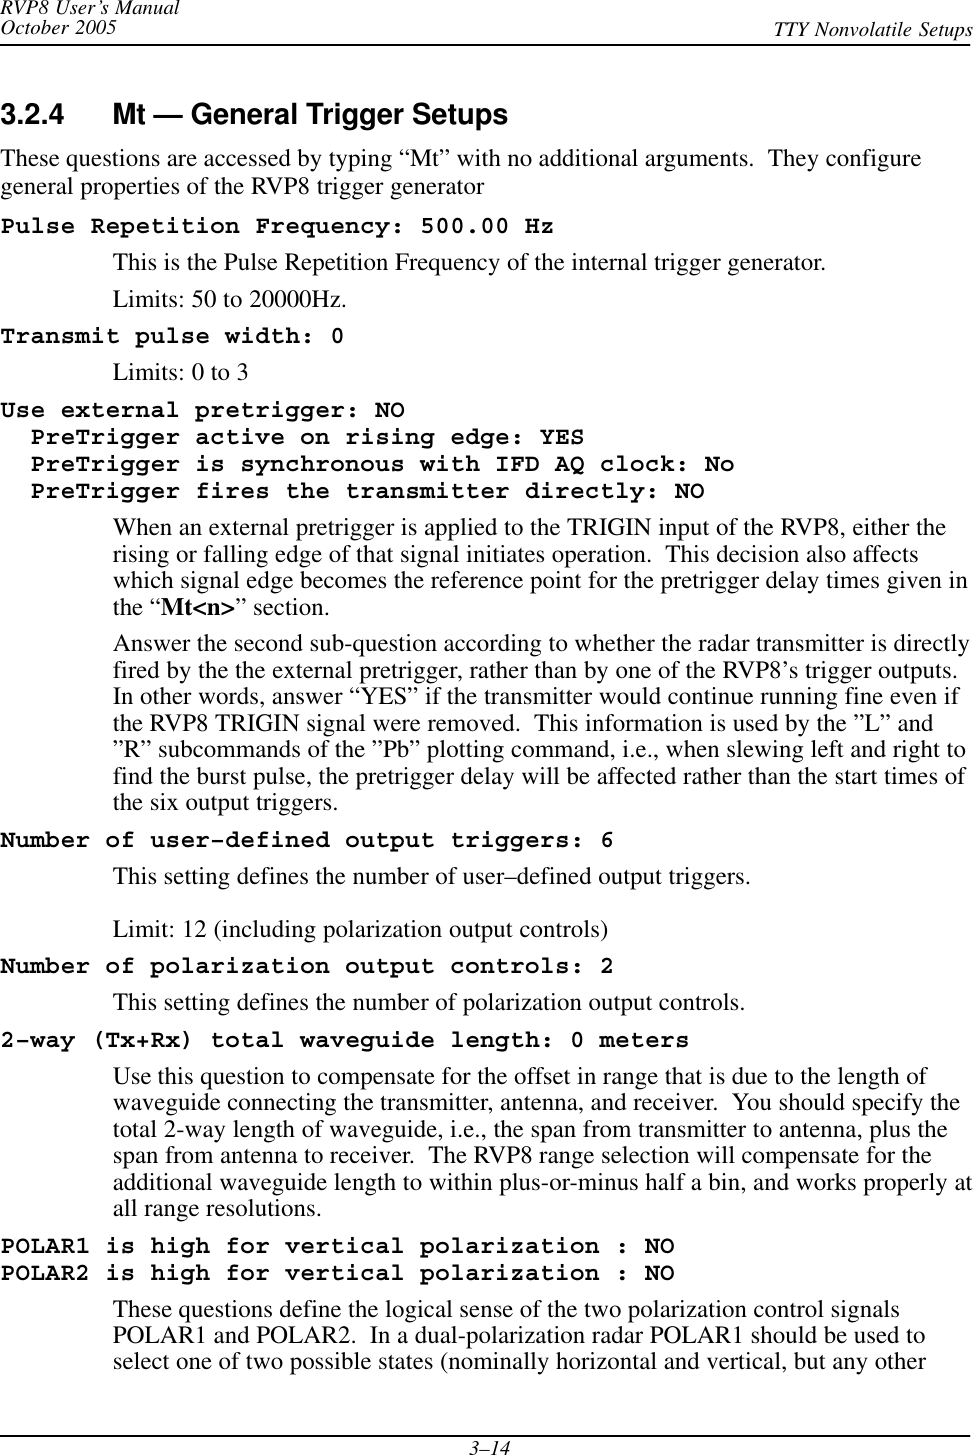 RVP8 User’s ManualOctober 2005 TTY Nonvolatile Setups3–143.2.4 Mt — General Trigger SetupsThese questions are accessed by typing “Mt” with no additional arguments.  They configuregeneral properties of the RVP8 trigger generatorPulse Repetition Frequency: 500.00 HzThis is the Pulse Repetition Frequency of the internal trigger generator.Limits: 50 to 20000Hz.Transmit pulse width: 0Limits: 0 to 3Use external pretrigger: NO  PreTrigger active on rising edge: YES  PreTrigger is synchronous with IFD AQ clock: No  PreTrigger fires the transmitter directly: NOWhen an external pretrigger is applied to the TRIGIN input of the RVP8, either therising or falling edge of that signal initiates operation.  This decision also affectswhich signal edge becomes the reference point for the pretrigger delay times given inthe “Mt&lt;n&gt;” section.Answer the second sub-question according to whether the radar transmitter is directlyfired by the the external pretrigger, rather than by one of the RVP8’s trigger outputs.In other words, answer “YES” if the transmitter would continue running fine even ifthe RVP8 TRIGIN signal were removed.  This information is used by the ”L” and”R” subcommands of the ”Pb” plotting command, i.e., when slewing left and right tofind the burst pulse, the pretrigger delay will be affected rather than the start times ofthe six output triggers.Number of user–defined output triggers: 6This setting defines the number of user–defined output triggers.Limit: 12 (including polarization output controls)Number of polarization output controls: 2This setting defines the number of polarization output controls.2–way (Tx+Rx) total waveguide length: 0 metersUse this question to compensate for the offset in range that is due to the length ofwaveguide connecting the transmitter, antenna, and receiver.  You should specify thetotal 2-way length of waveguide, i.e., the span from transmitter to antenna, plus thespan from antenna to receiver.  The RVP8 range selection will compensate for theadditional waveguide length to within plus-or-minus half a bin, and works properly atall range resolutions.POLAR1 is high for vertical polarization : NOPOLAR2 is high for vertical polarization : NOThese questions define the logical sense of the two polarization control signalsPOLAR1 and POLAR2.  In a dual-polarization radar POLAR1 should be used toselect one of two possible states (nominally horizontal and vertical, but any other